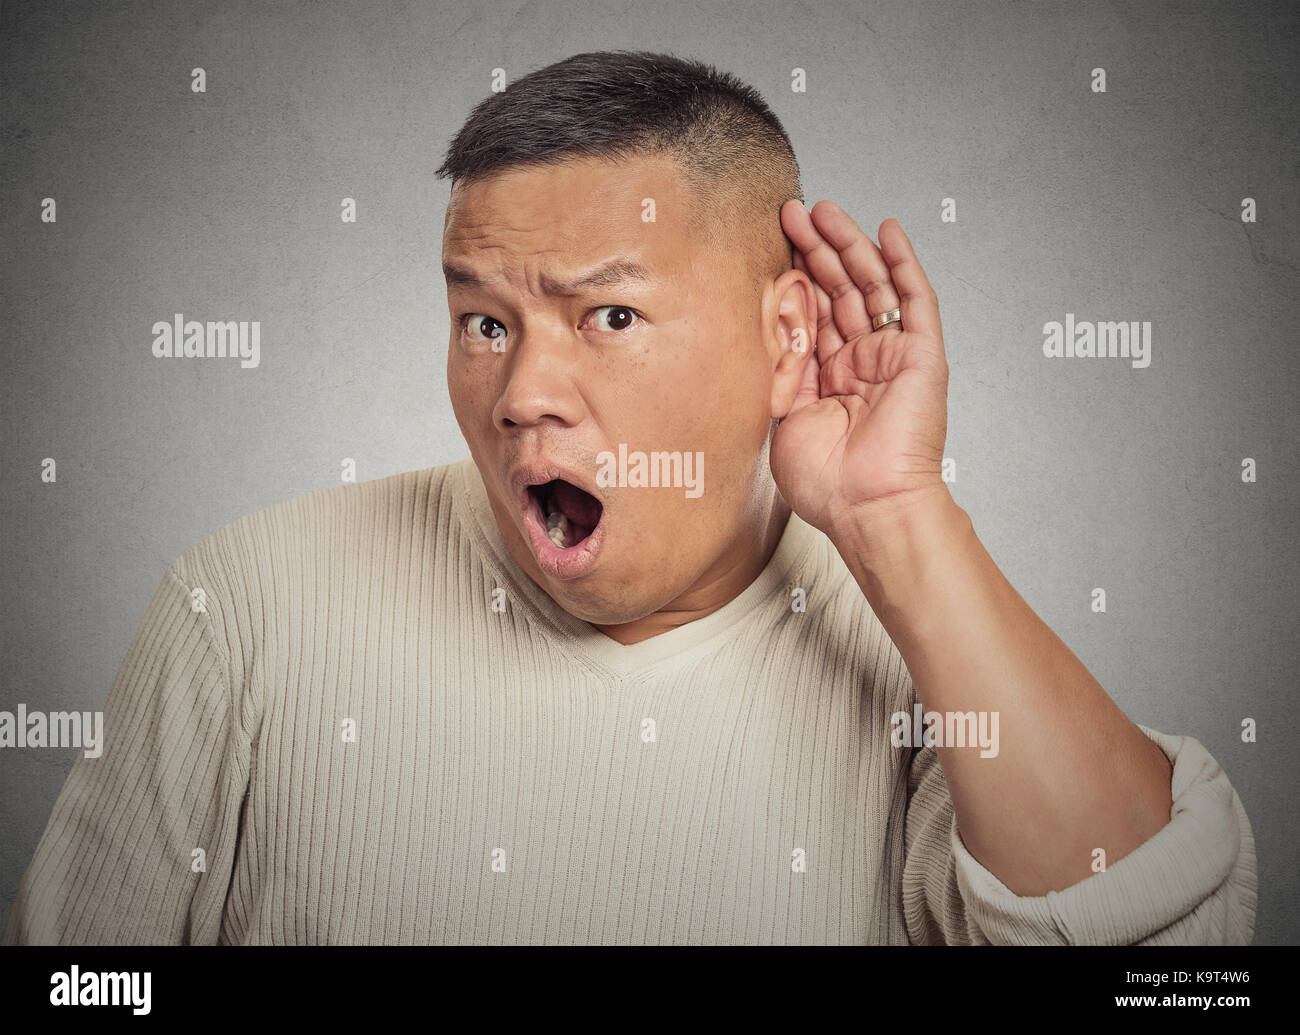 Closeup portrait of guy listening in on a conversation and seeming shocked by what he hears isolated on grey background with copy space Stock Photo